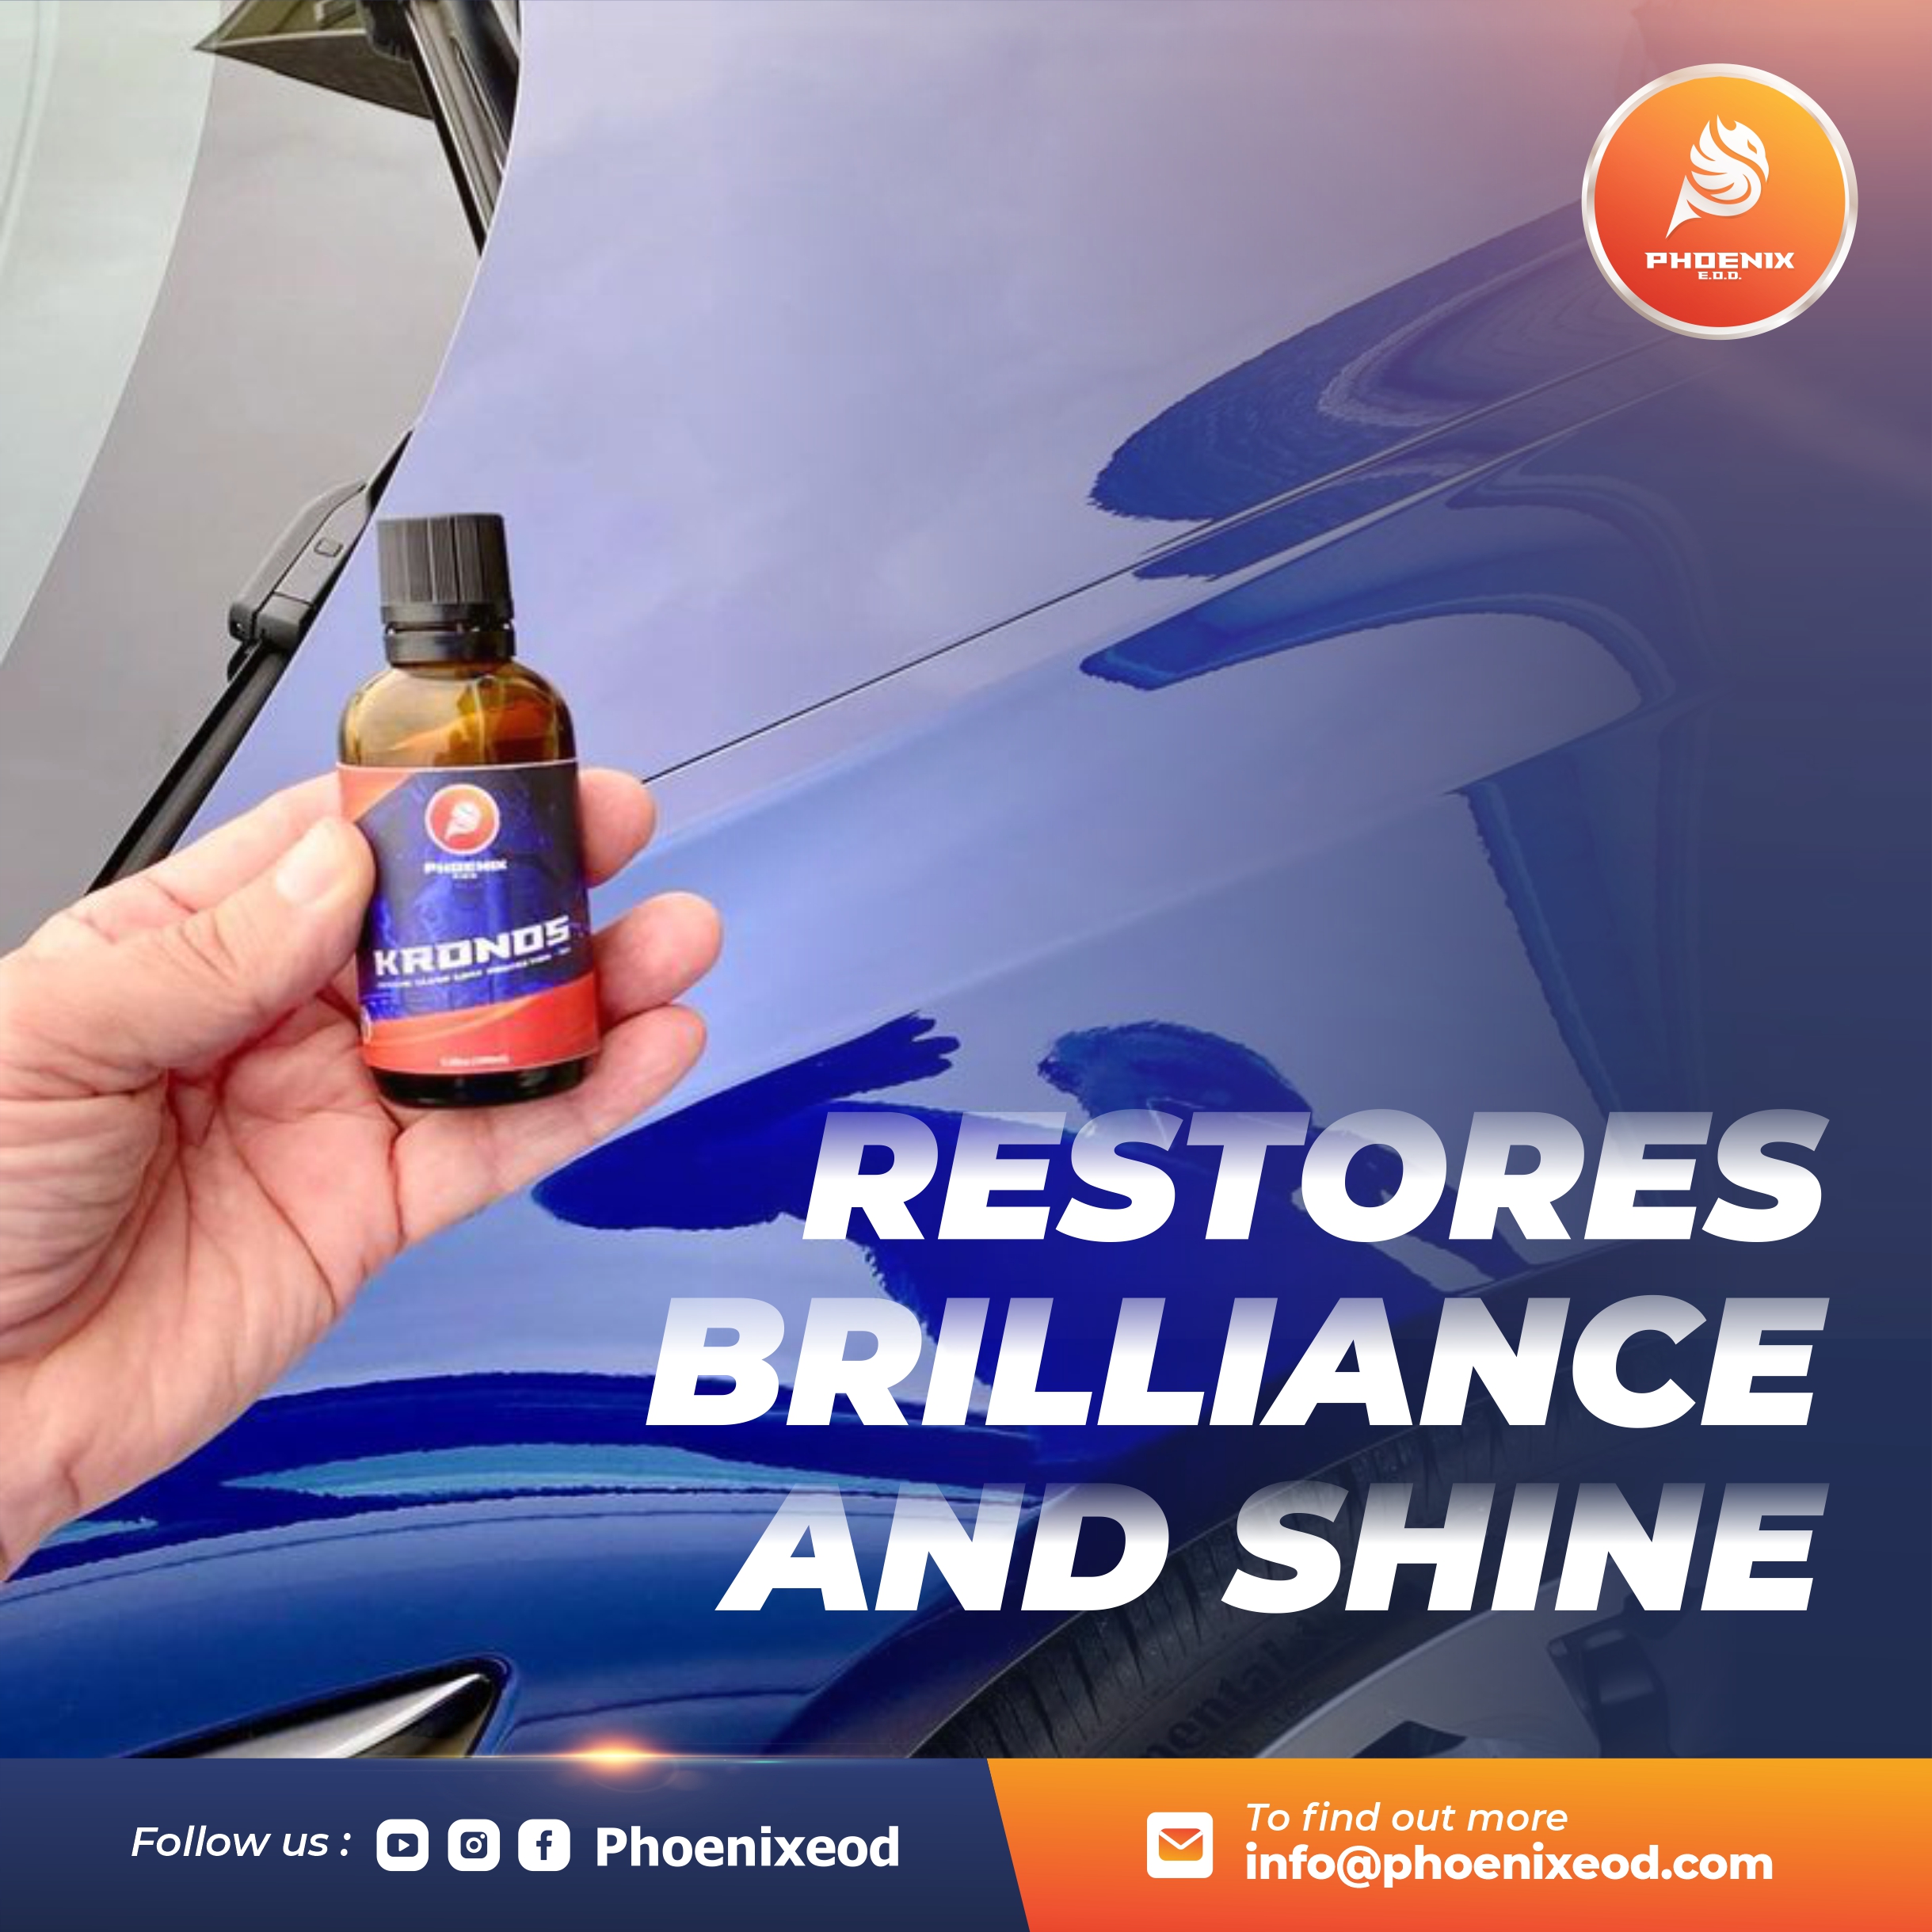 Ceramic Protectant Coating is Here!